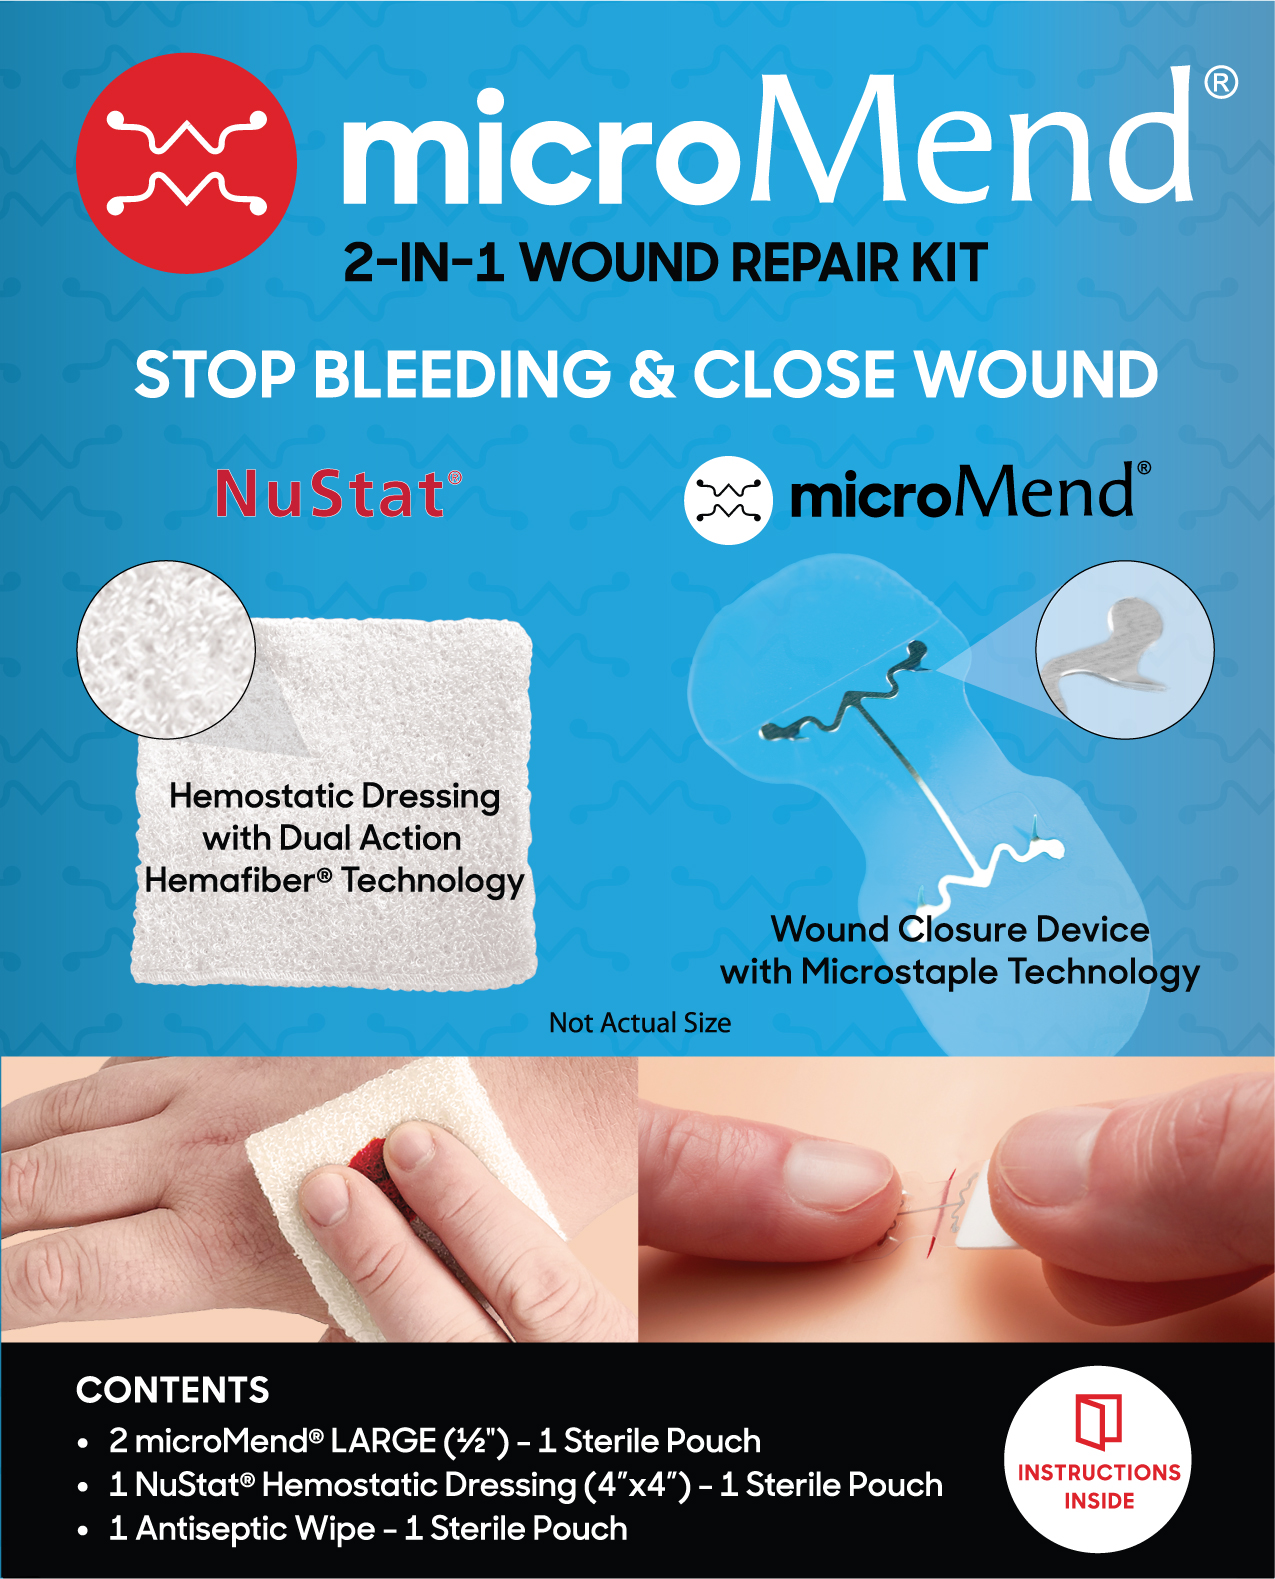 The microMend 2-in-1 Wound Repair Kit enables consumers to stop the bleeding and close the wound without a trip to the ER or urgent care.